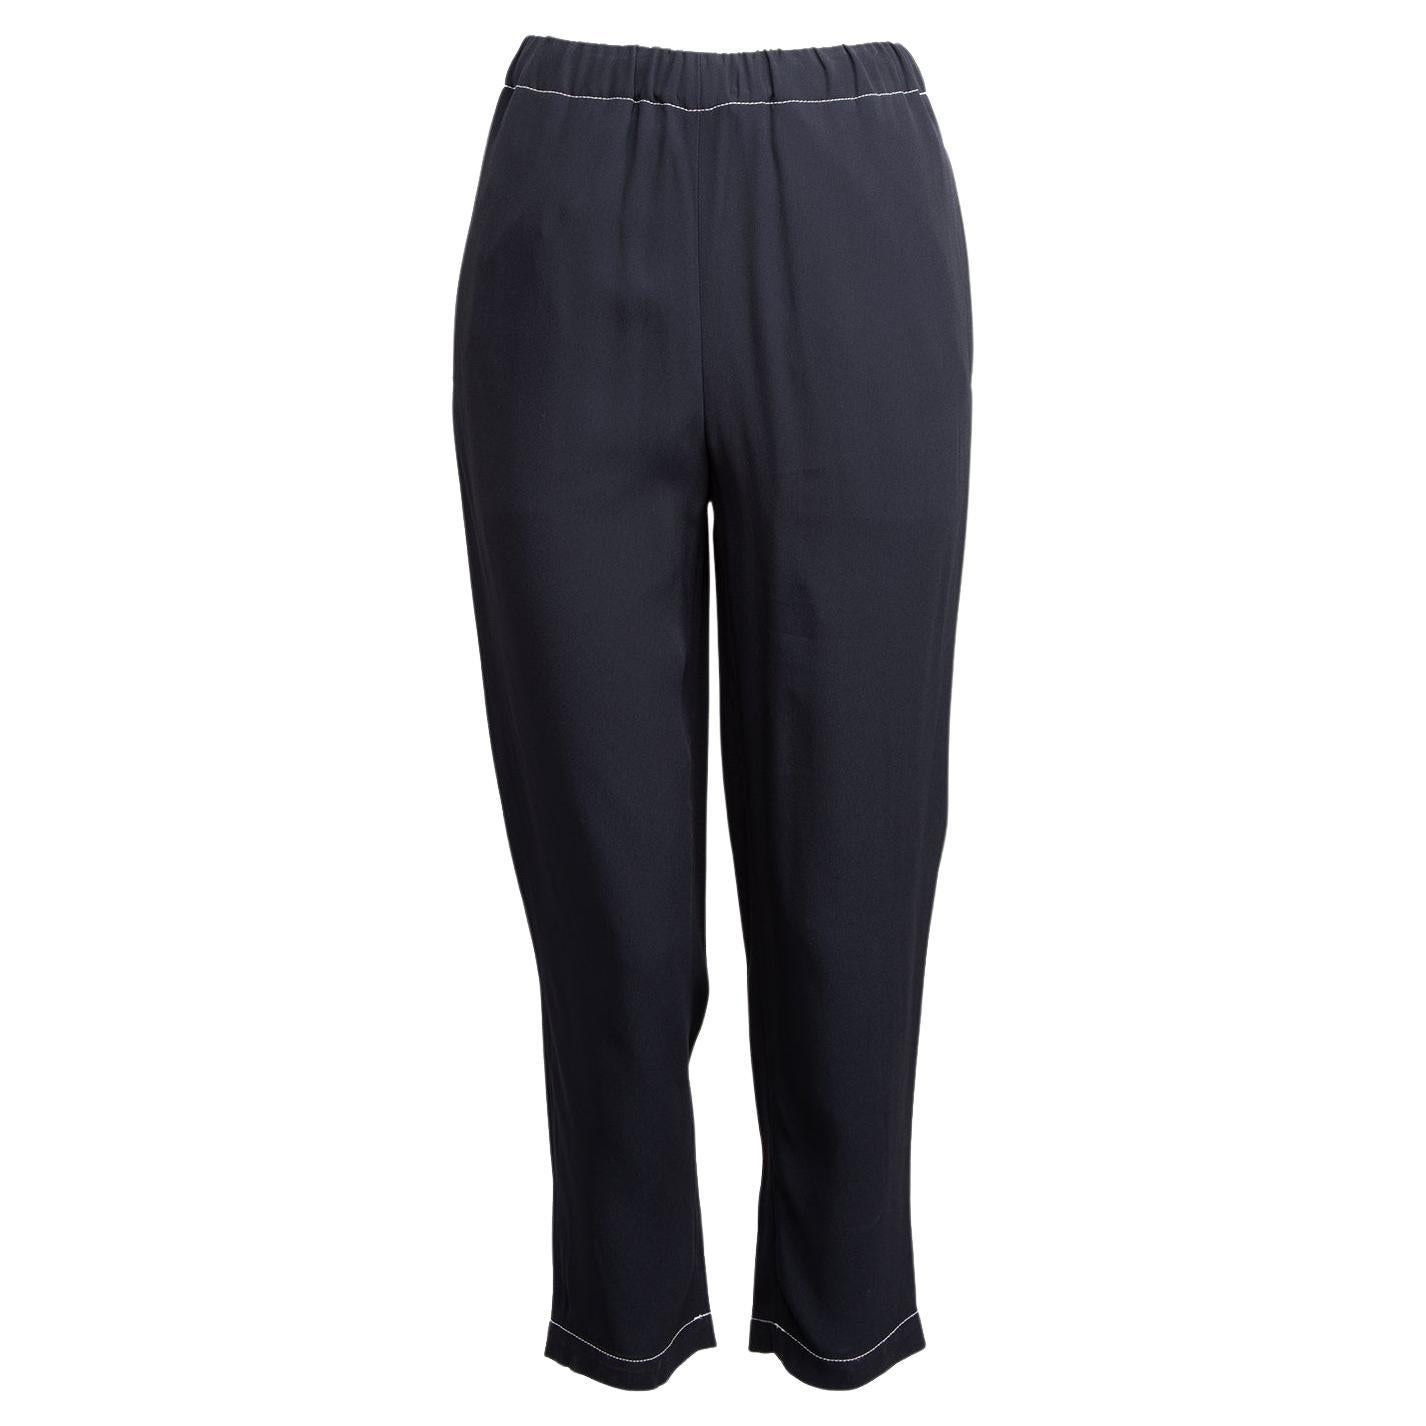 Marni Women's Navy Cropped Joggers